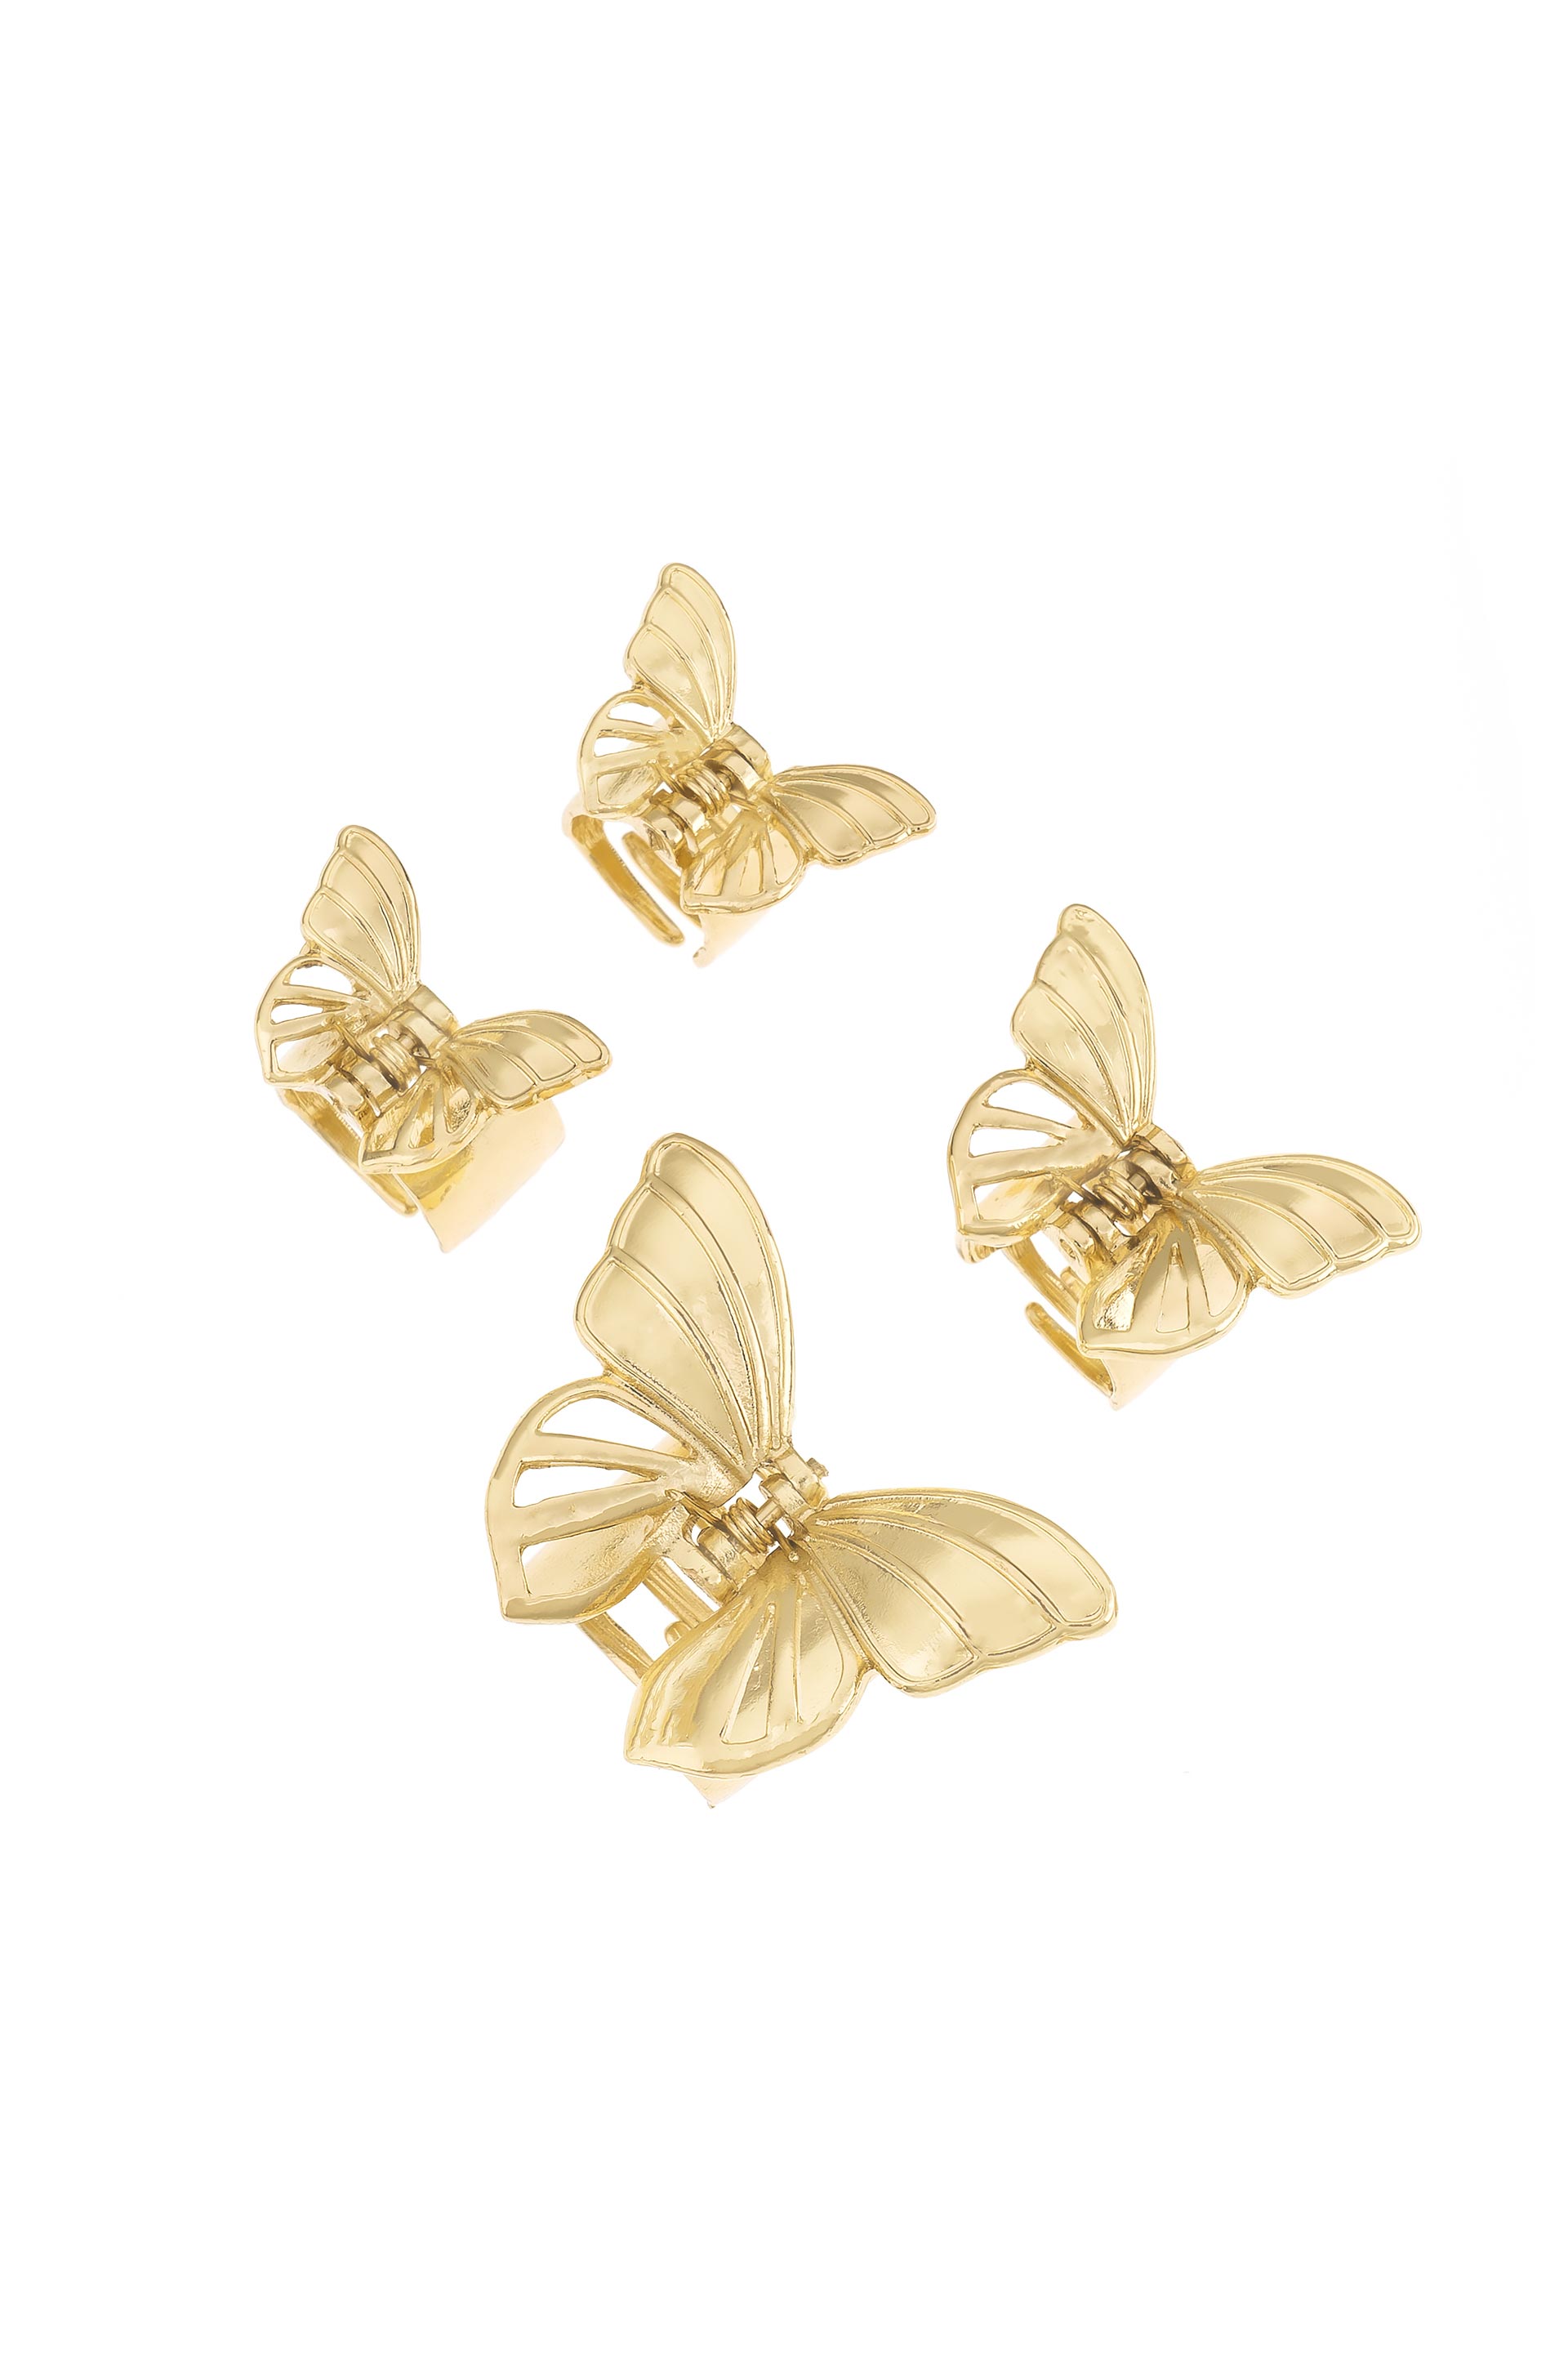 Flight of the Butterfly Golden Clip Set on white